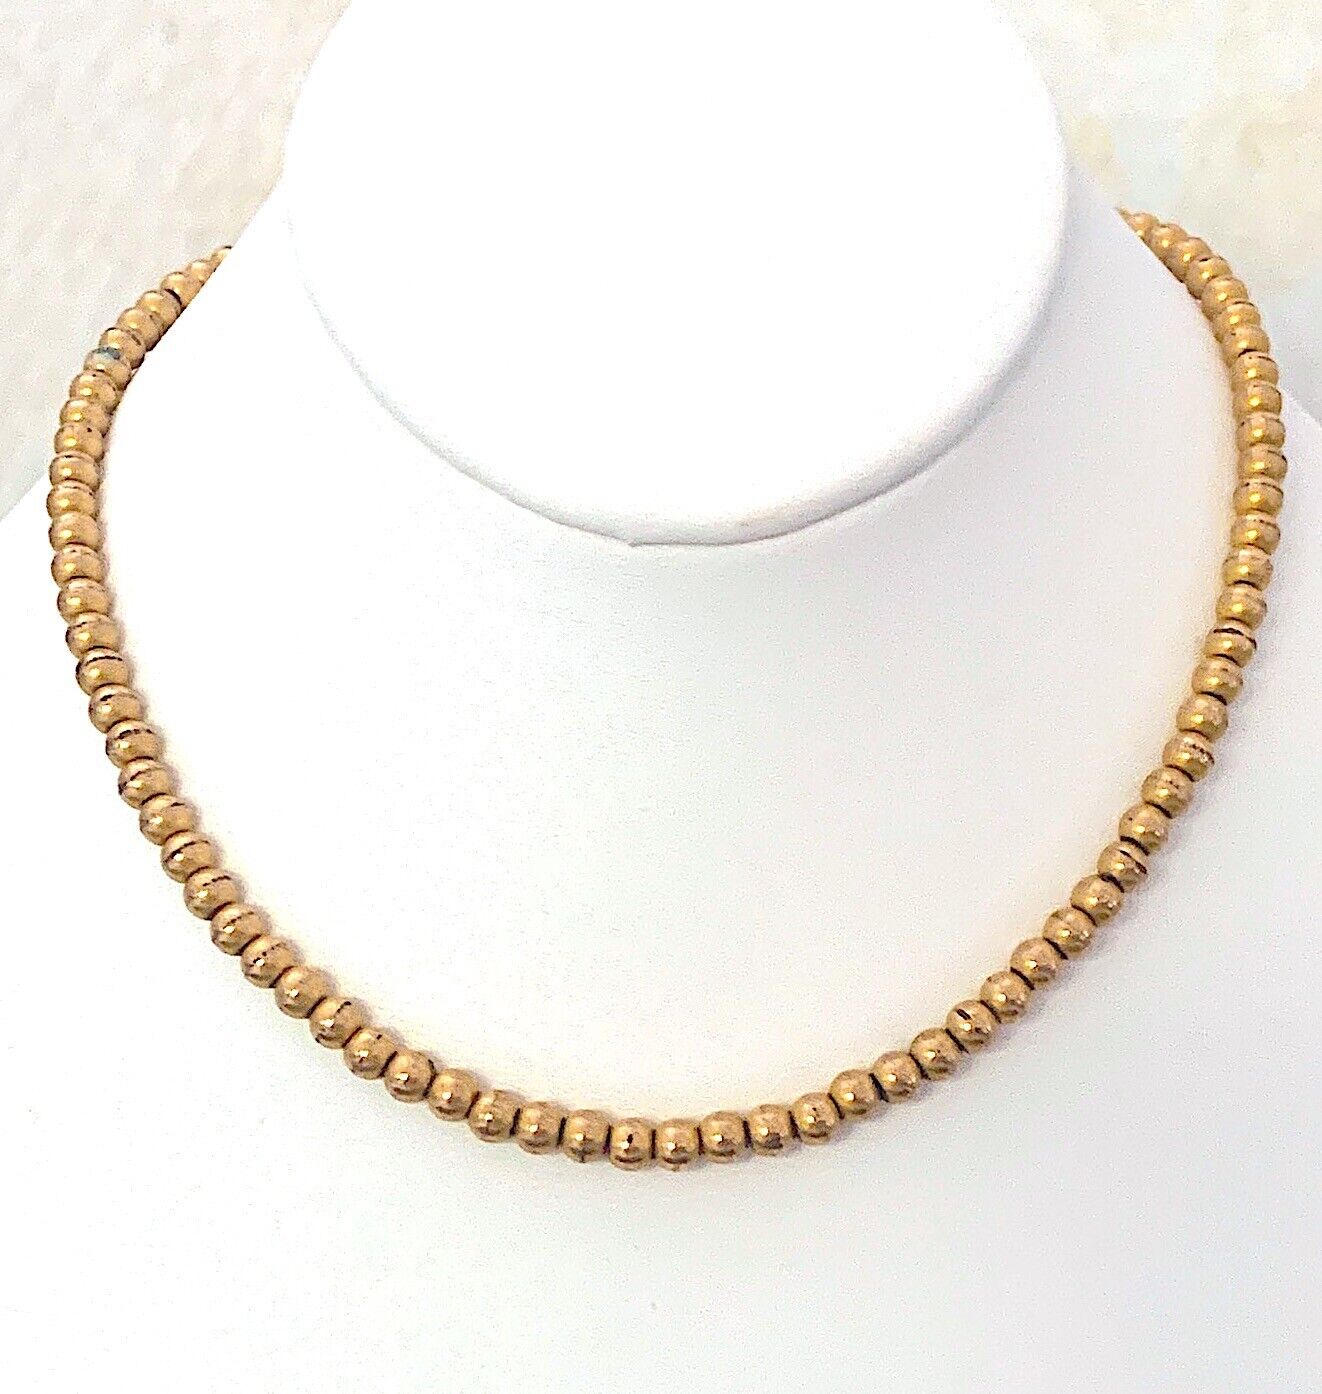 Antique Rolled Gold Bead Necklace 19th Century - image 1